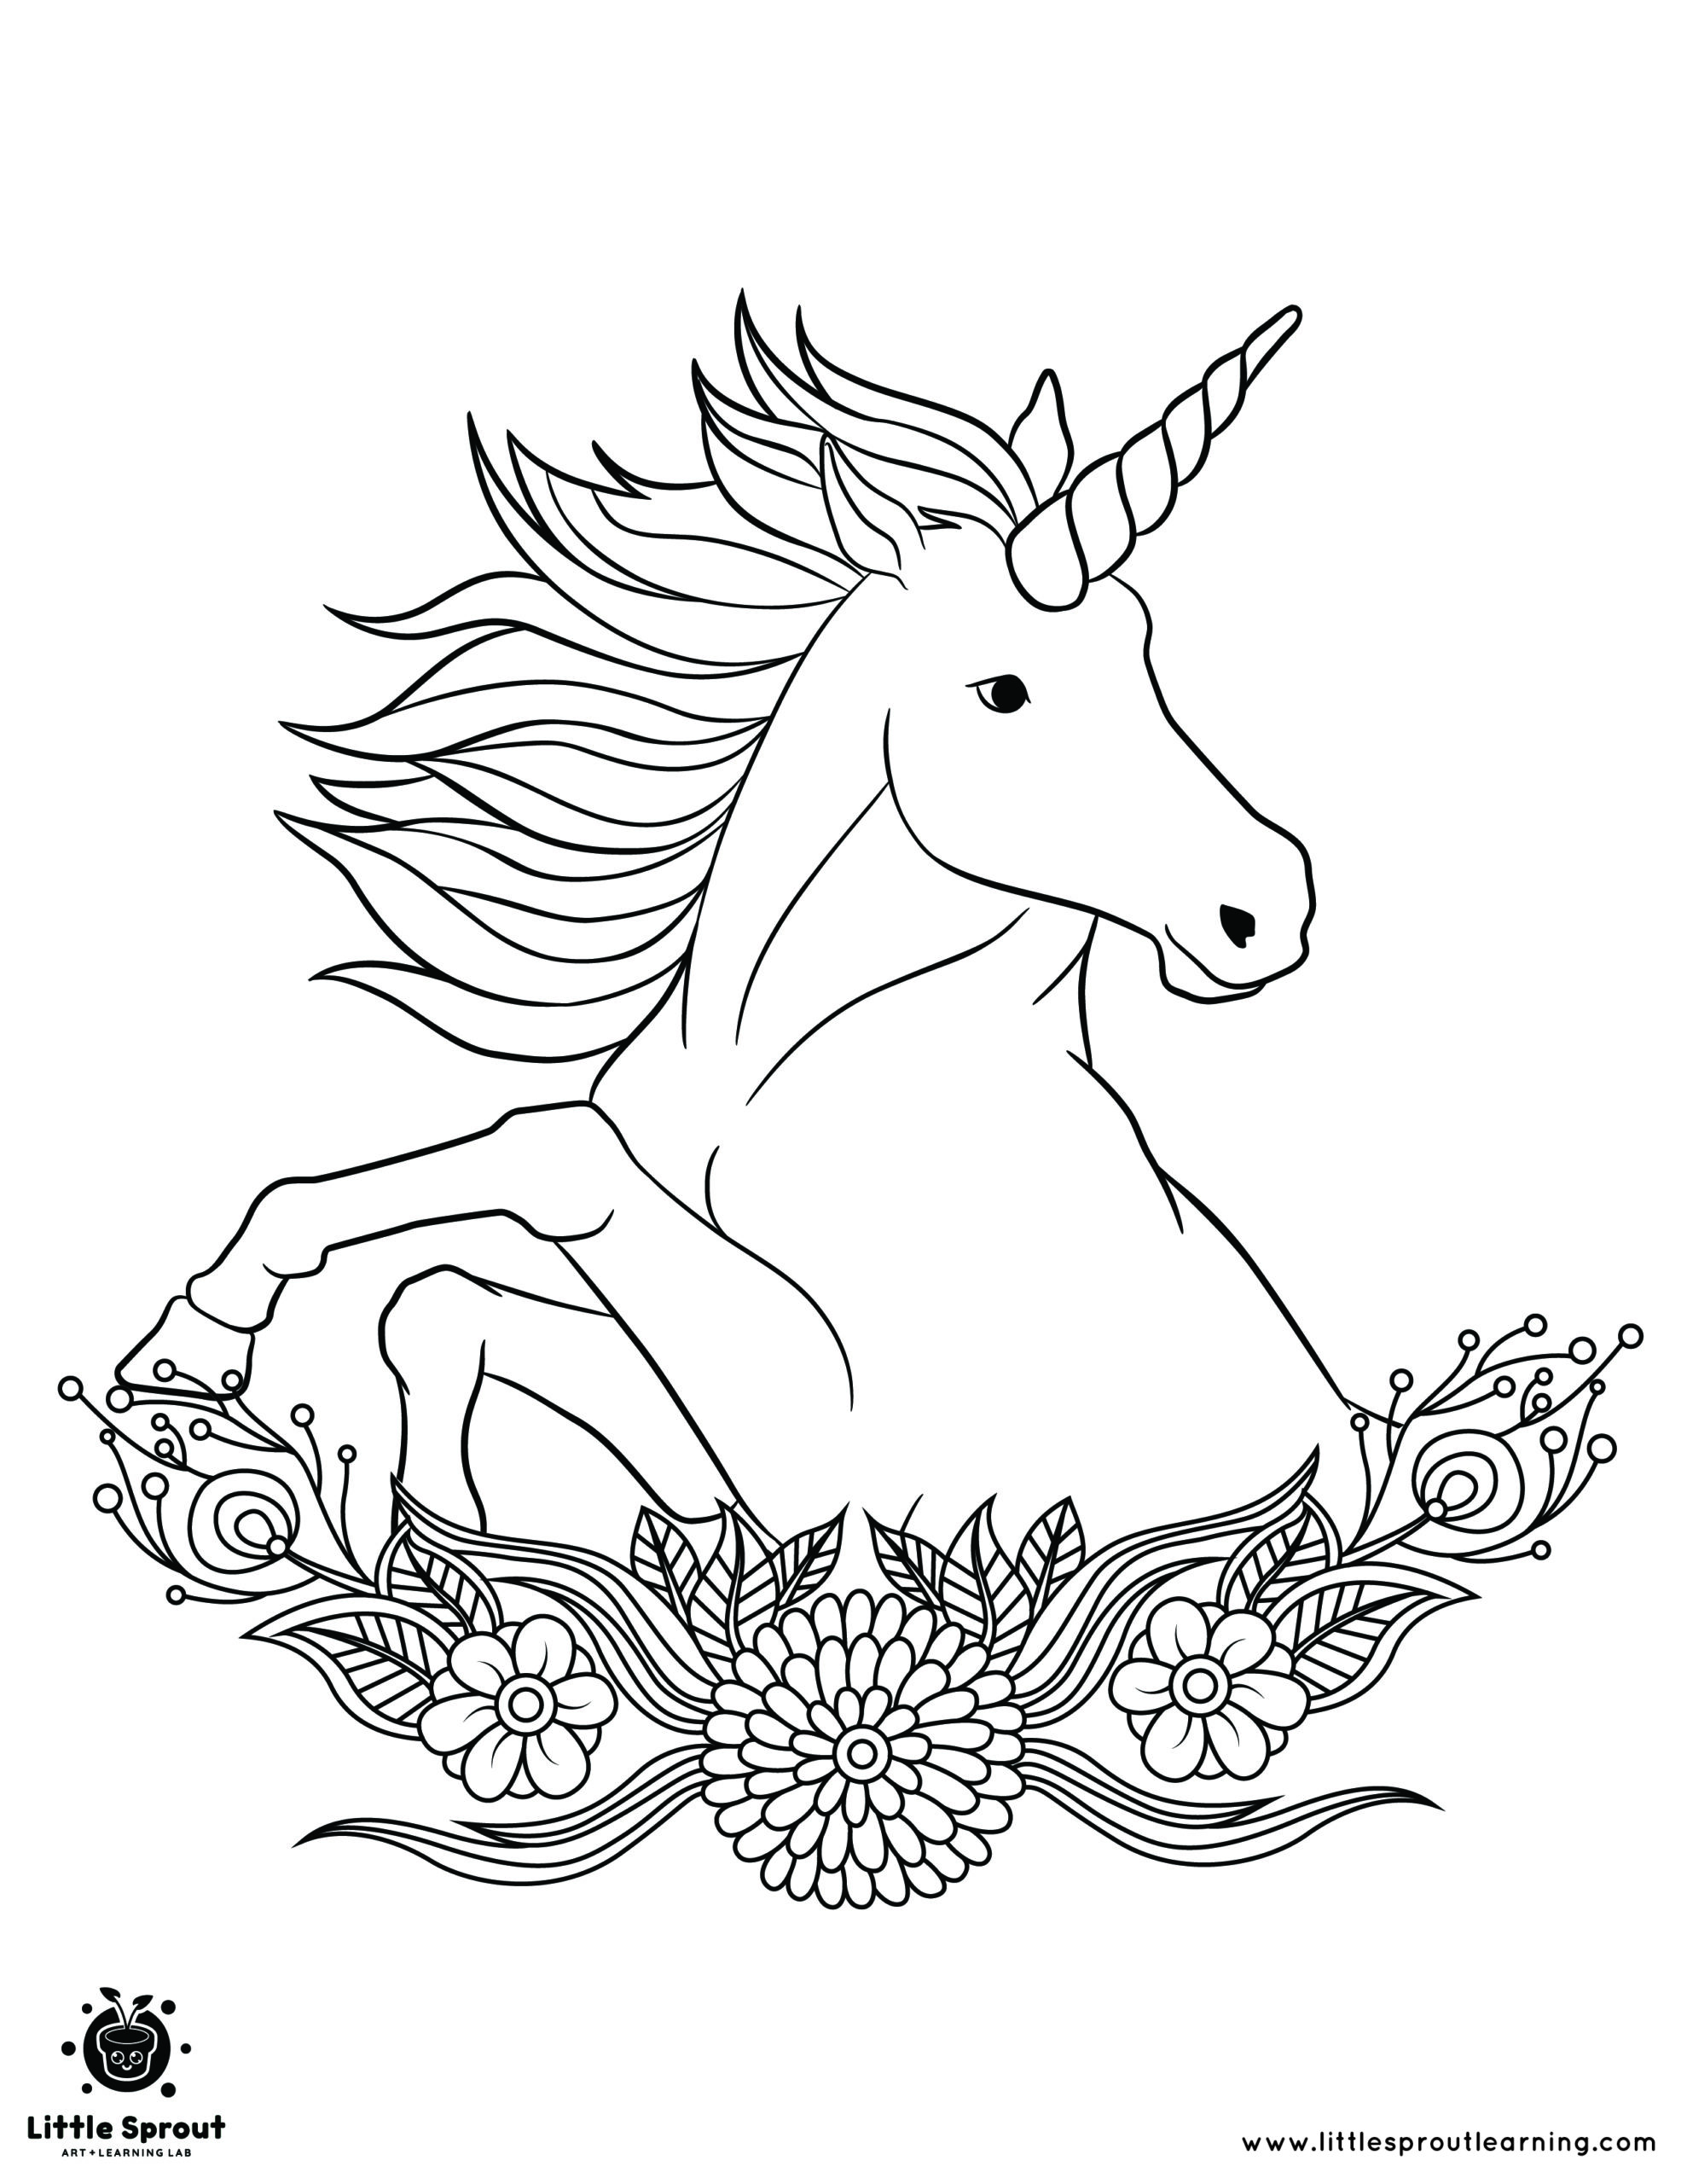 The best unicorn coloring page little sprout art